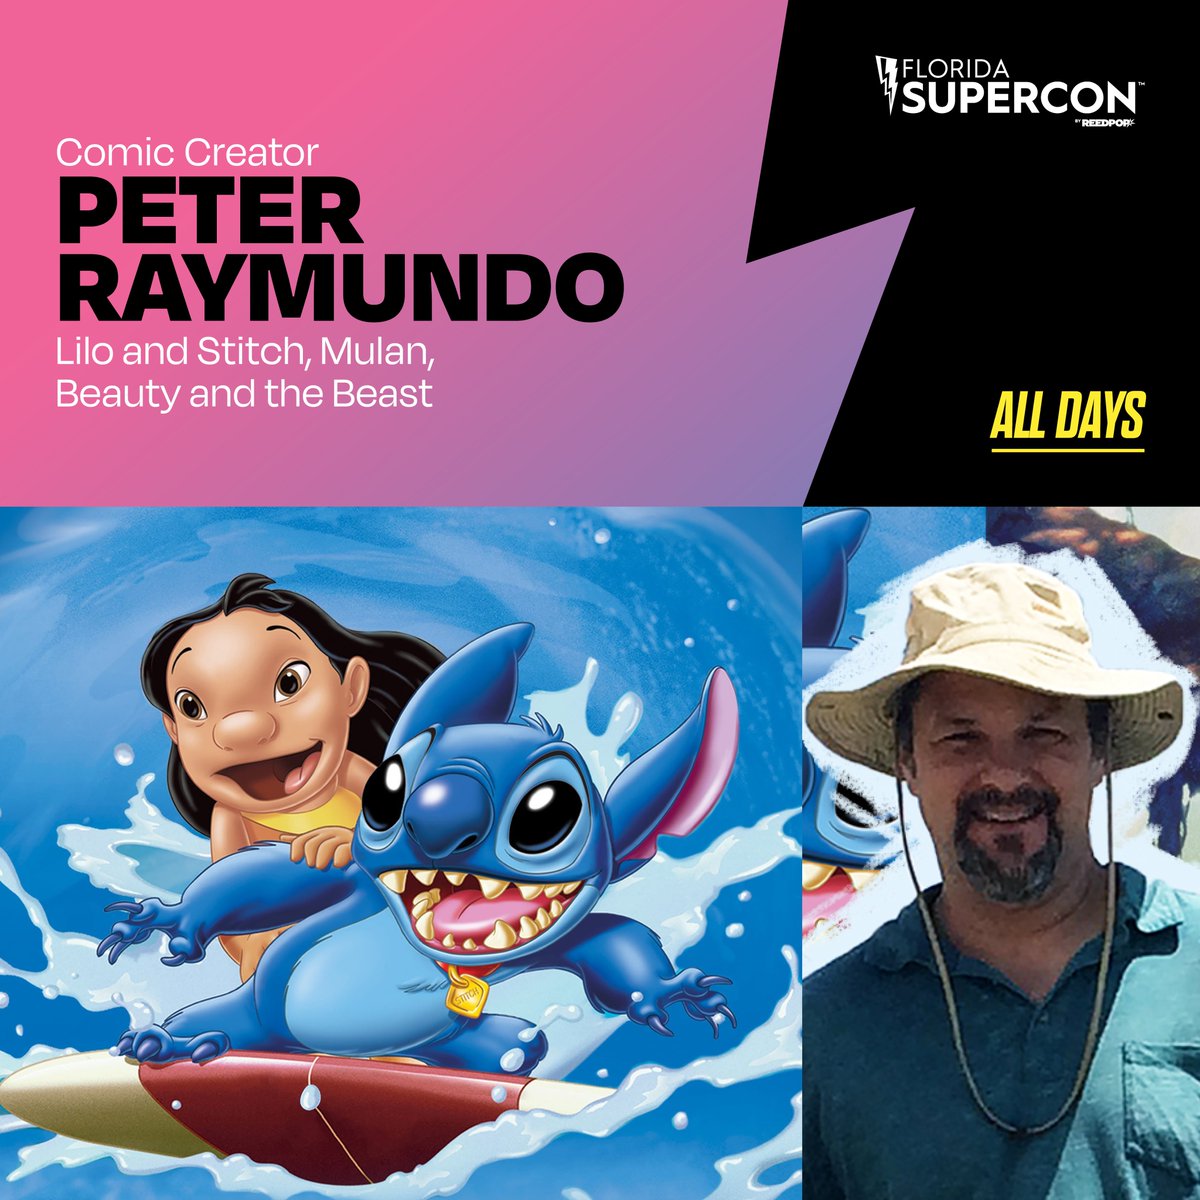 Jim Starlin (Dreadstar, Thanos), Arielle Jovellanos (Women of Marvel, Girl Taking Over: A Lois Lane Story), & Peter Raymundo (Lilo and Stitch, Beauty and the Beast) join us July 12-14 for Florida Supercon's Artist Alley!

💫 Buy tickets: Supercon24.com/BuyTickets